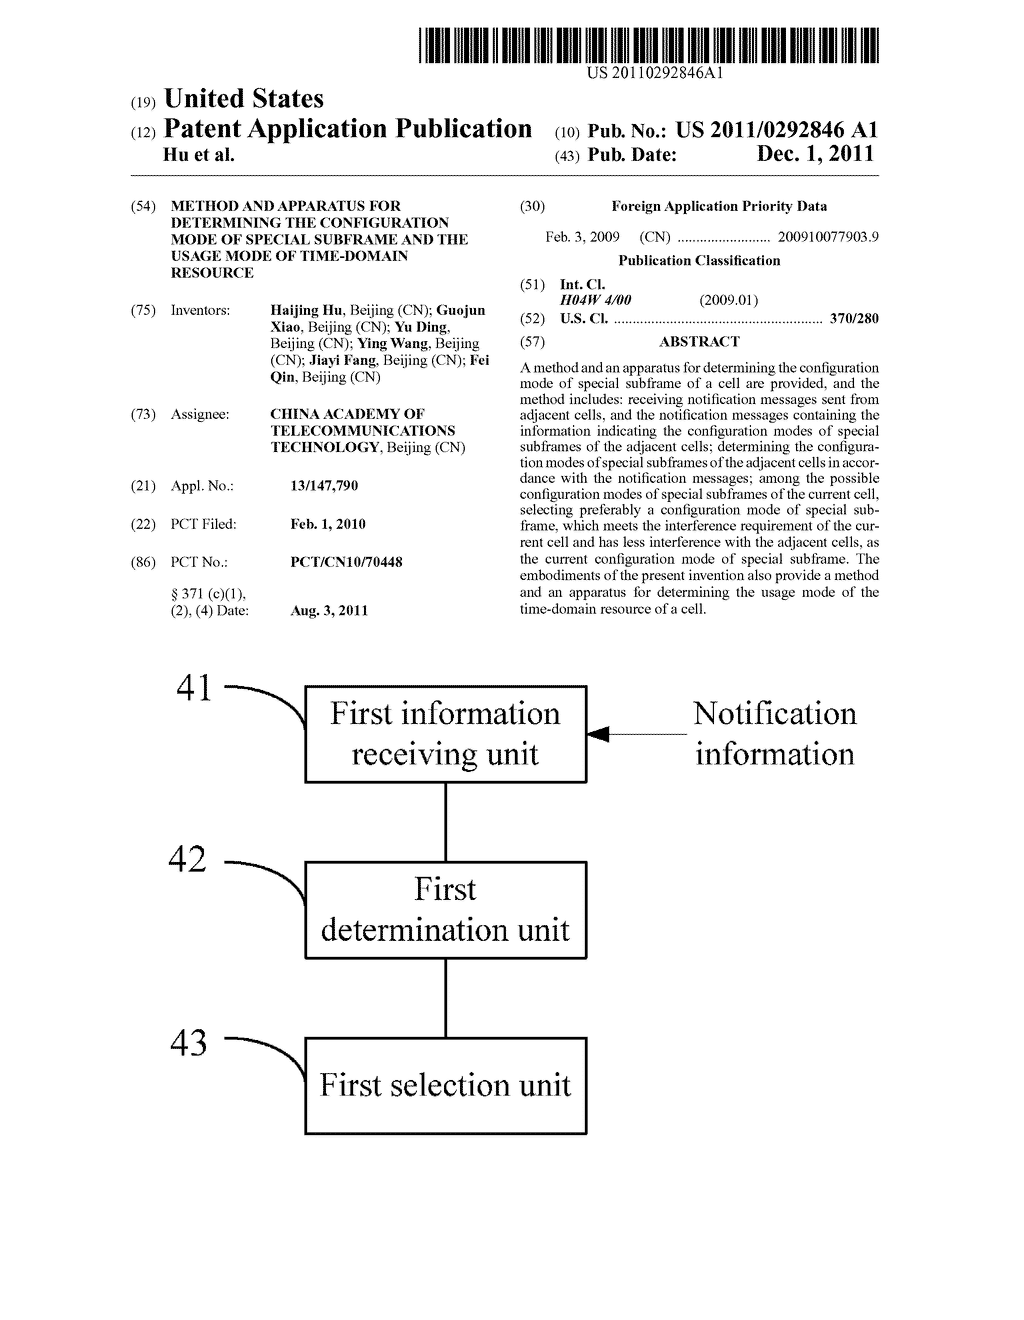 METHOD AND APPARATUS FOR DETERMINING THE CONFIGURATION MODE OF SPECIAL     SUBFRAME AND THE USAGE MODE OF TIME-DOMAIN RESOURCE - diagram, schematic, and image 01